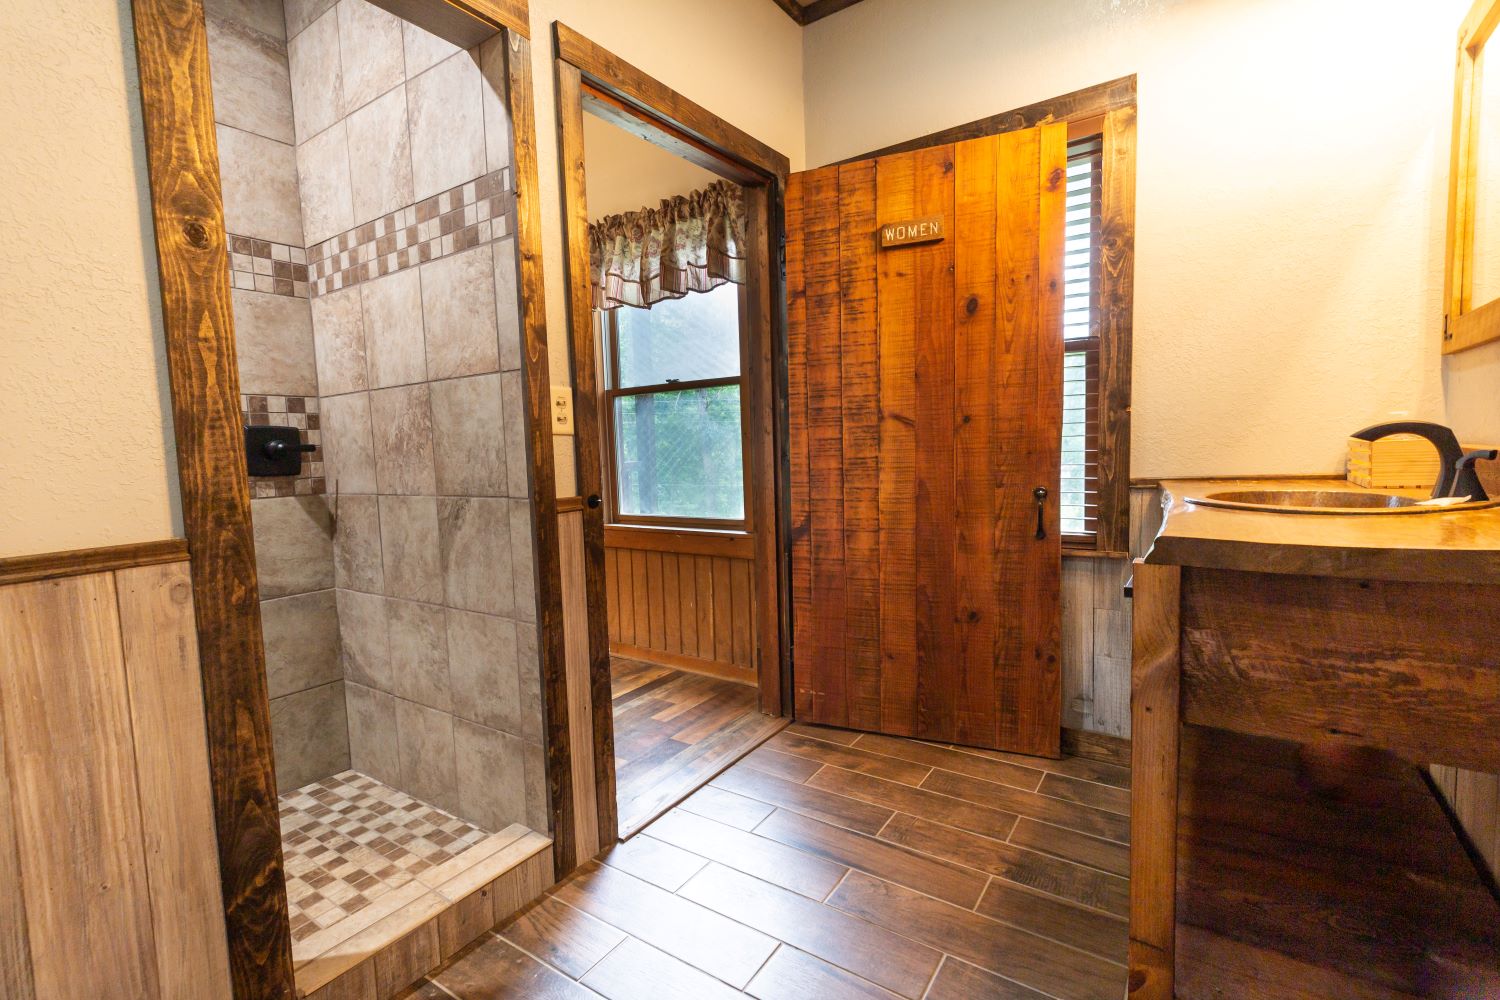 image of bathroom area in bunkhouse cabin